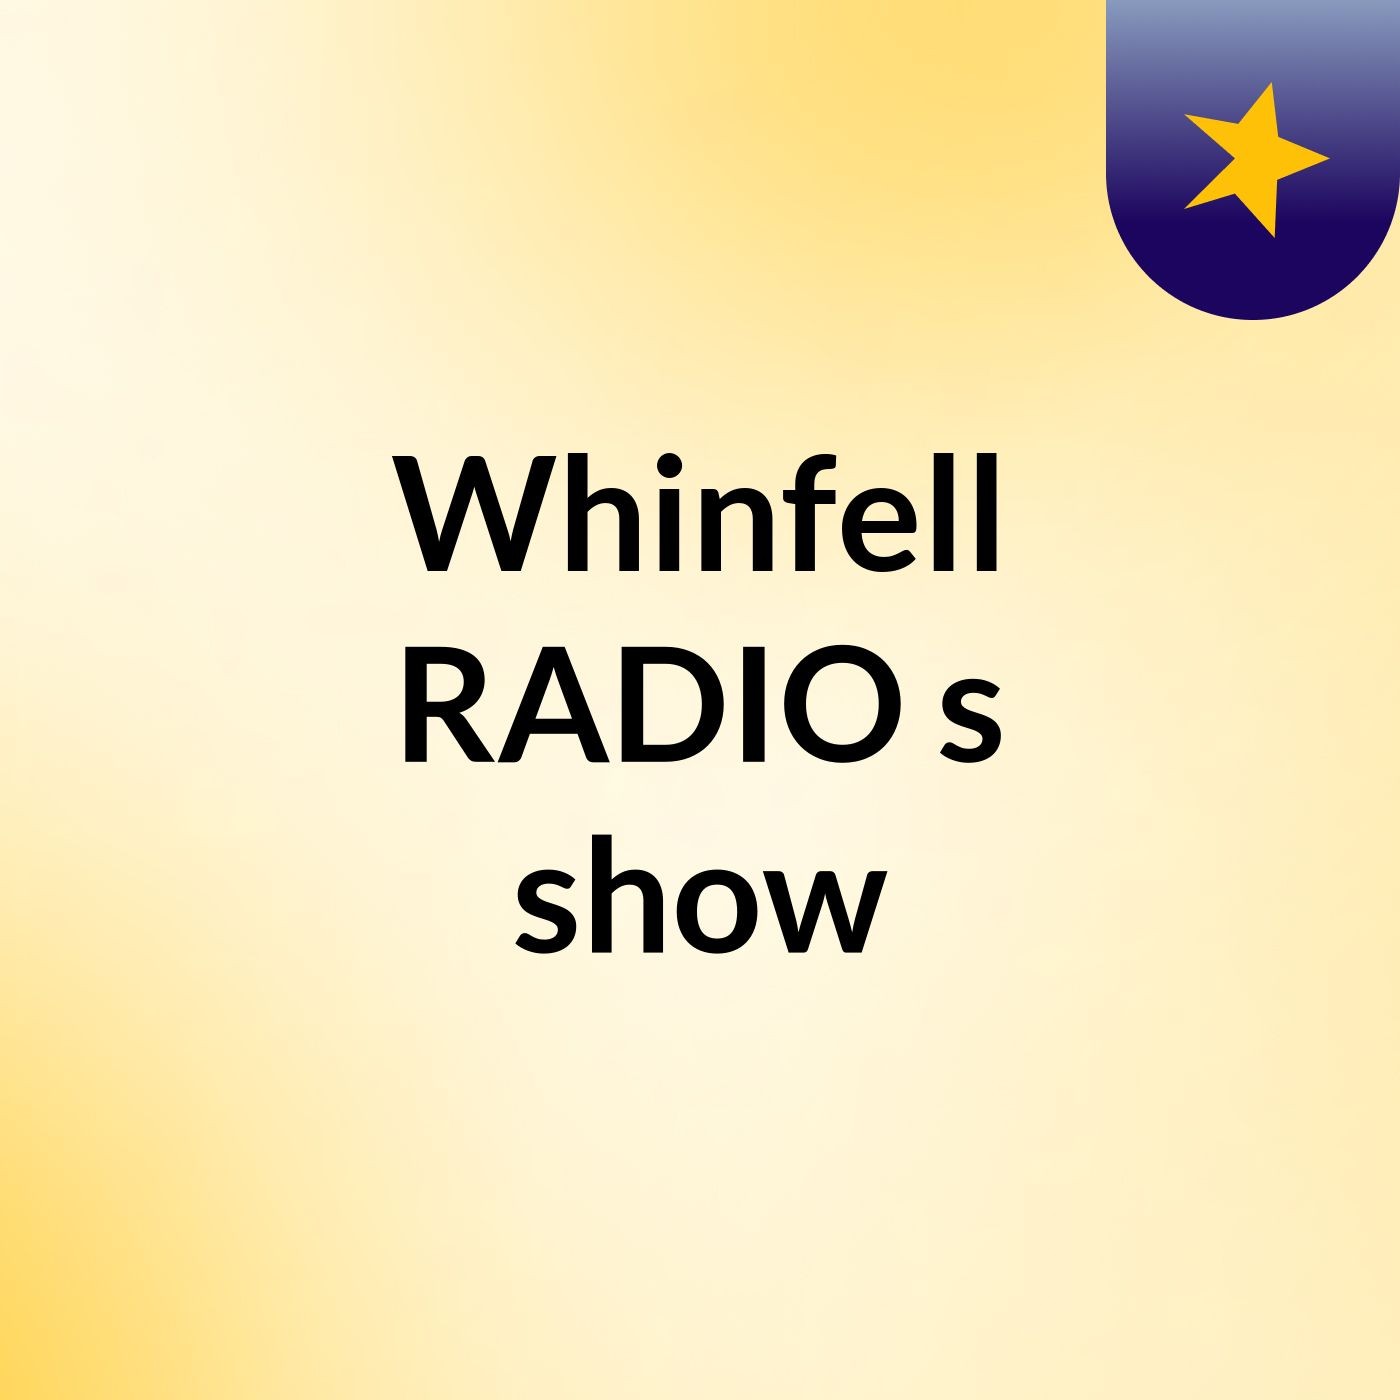 Whinfell RADIO's show